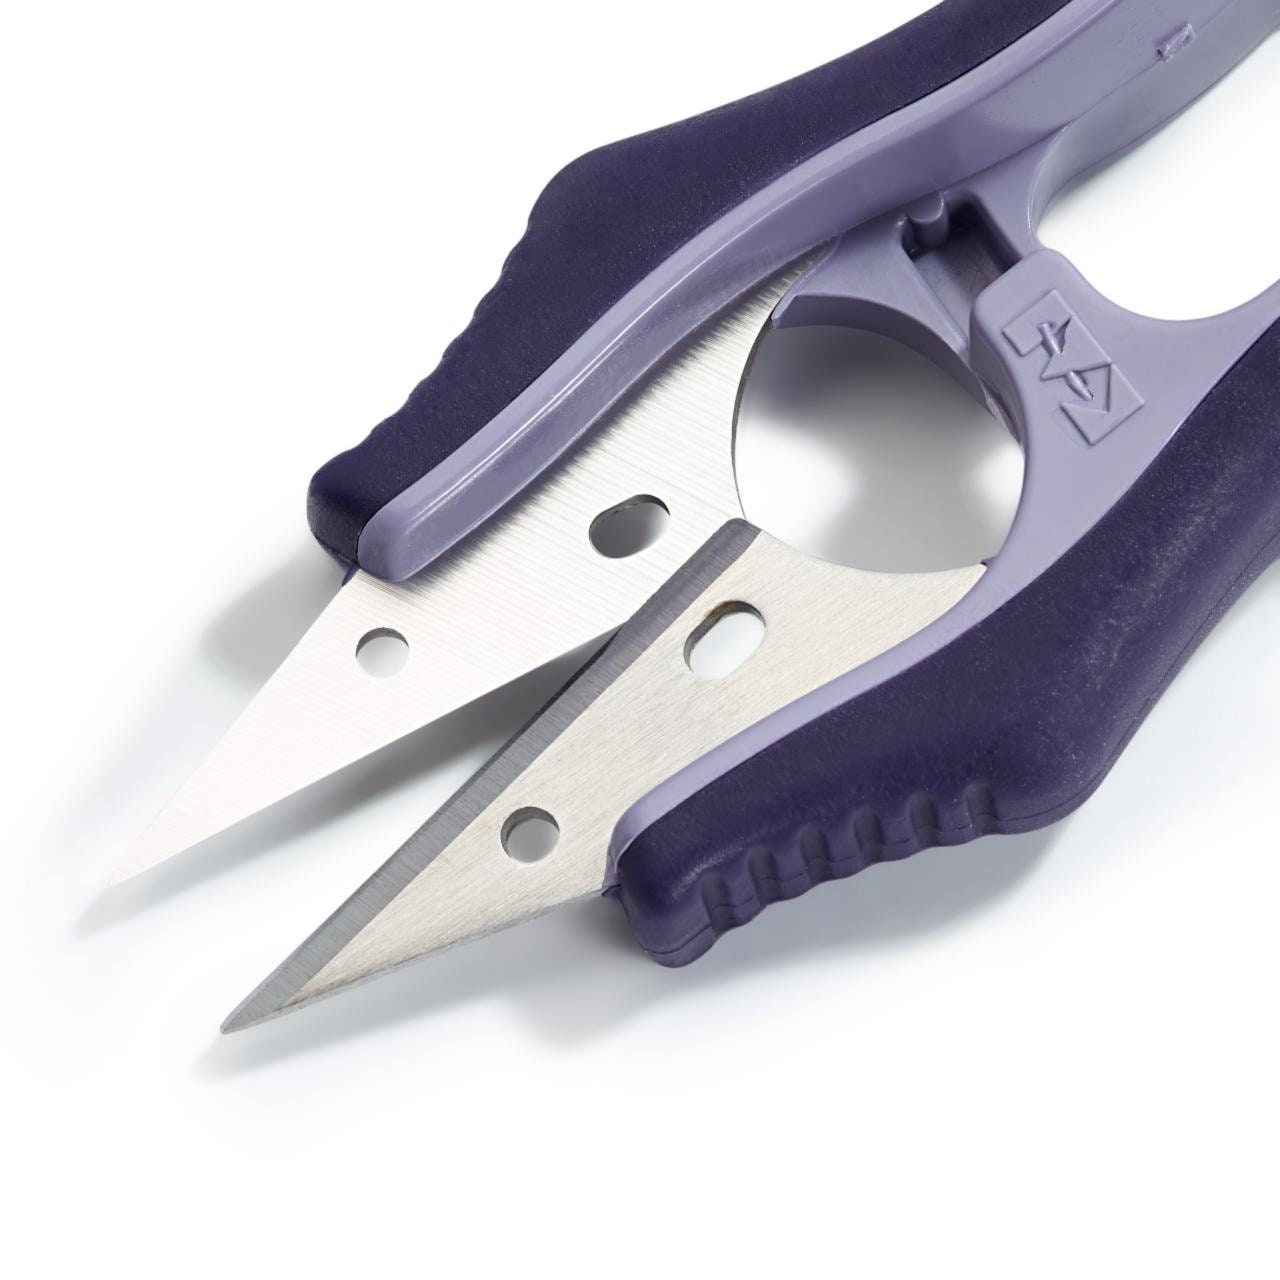 IDS-LA Thread snips 4.5 in. Stainless steel